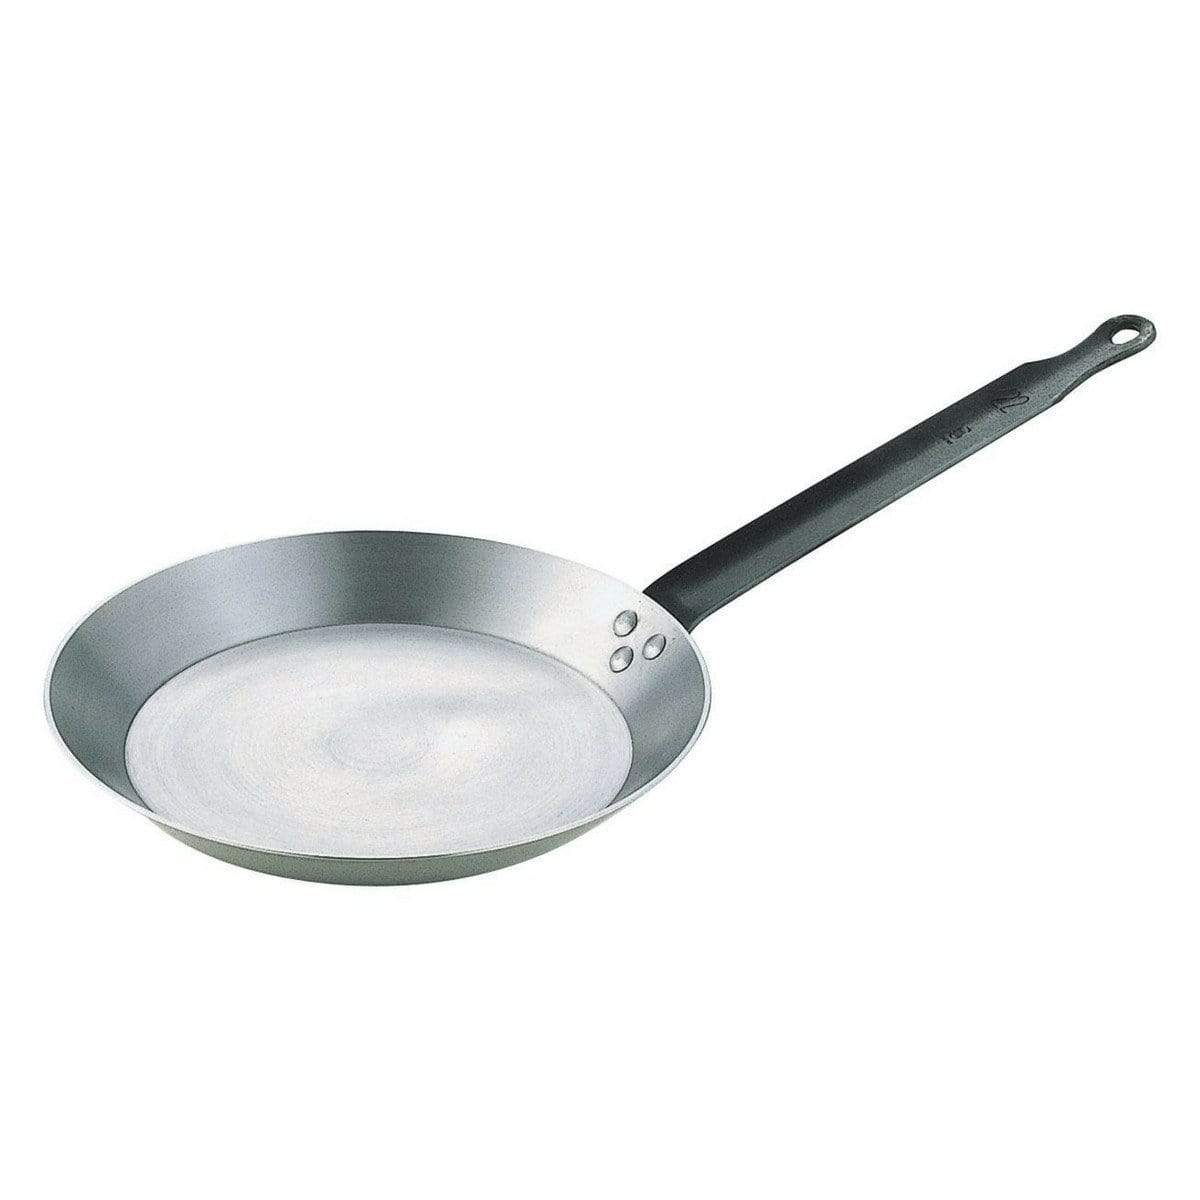 Crepe Pans. Crepe fry pans for crepes, blinis, and russian pancakes